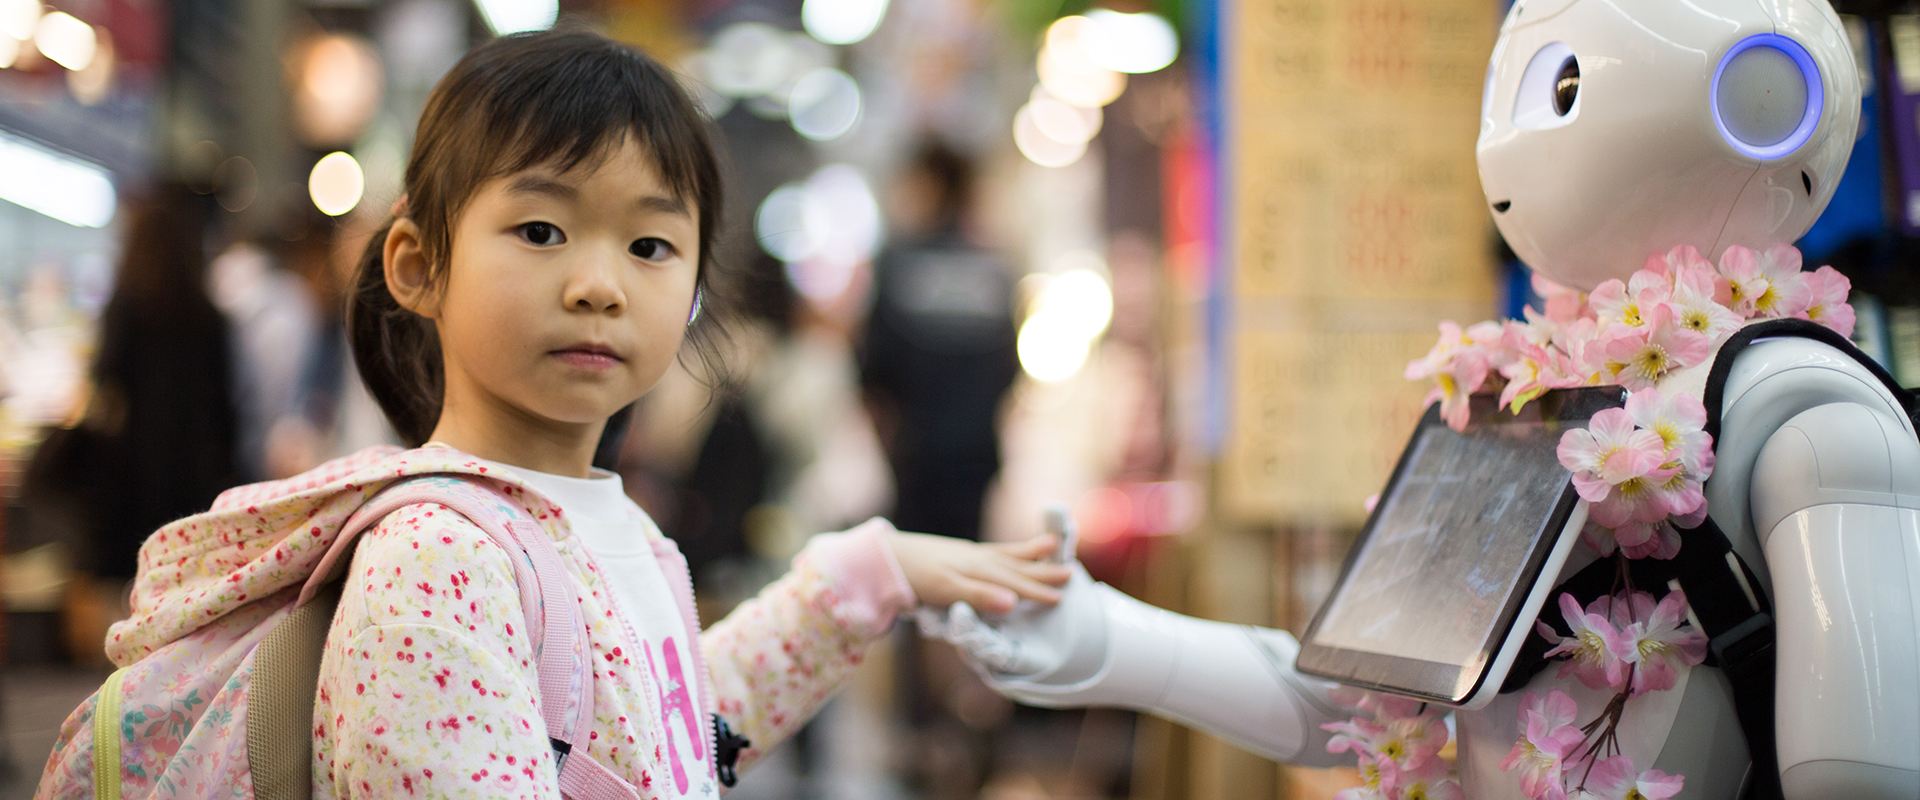 Girl shaking hand with a robot human